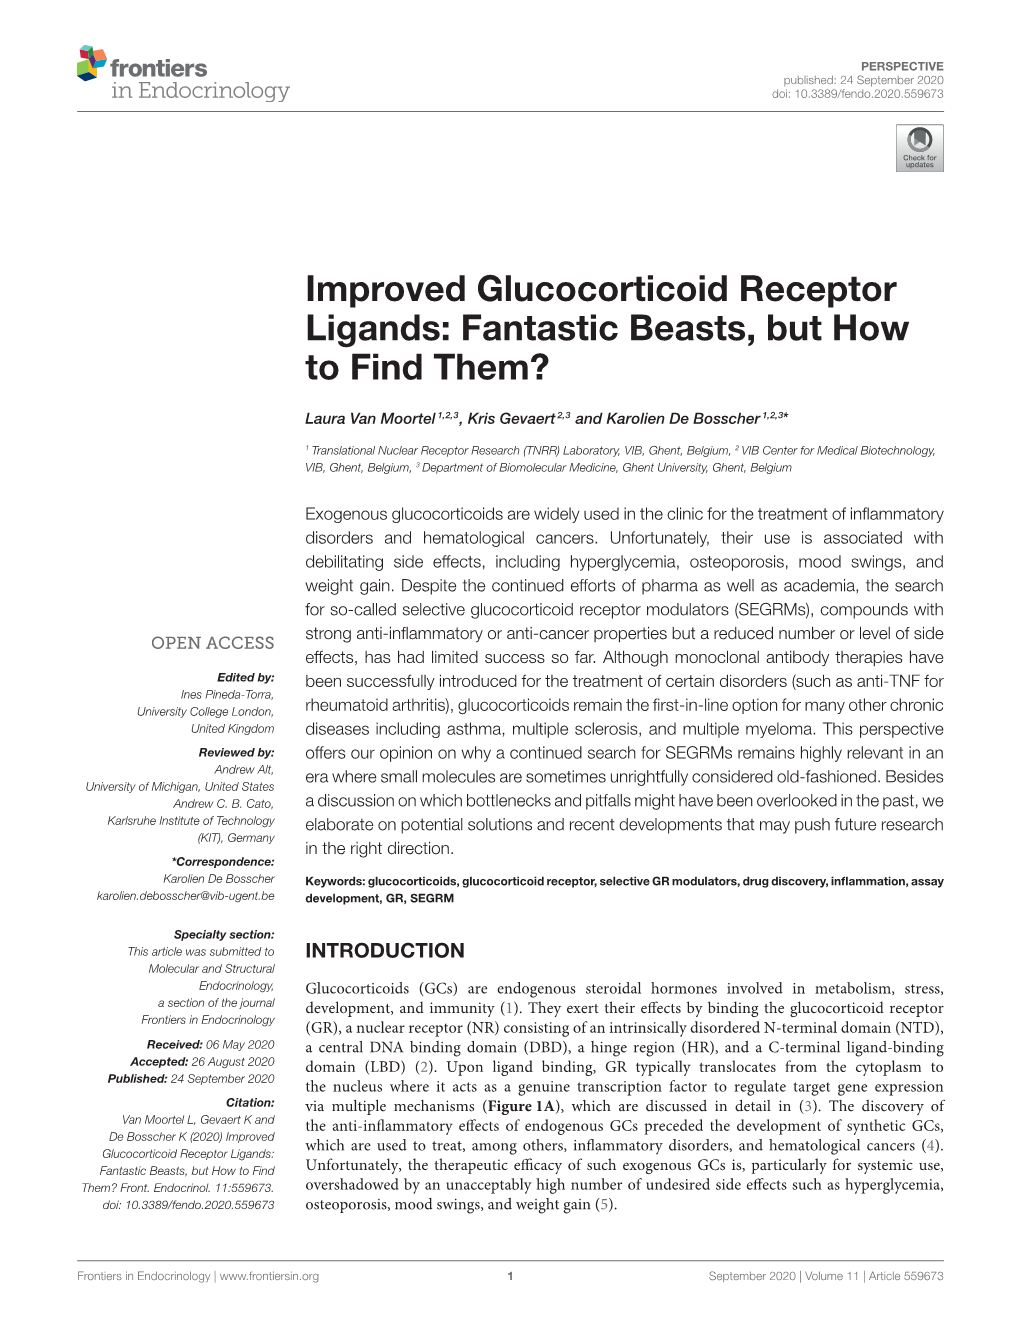 Improved Glucocorticoid Receptor Ligands: Fantastic Beasts, but How to Find Them?